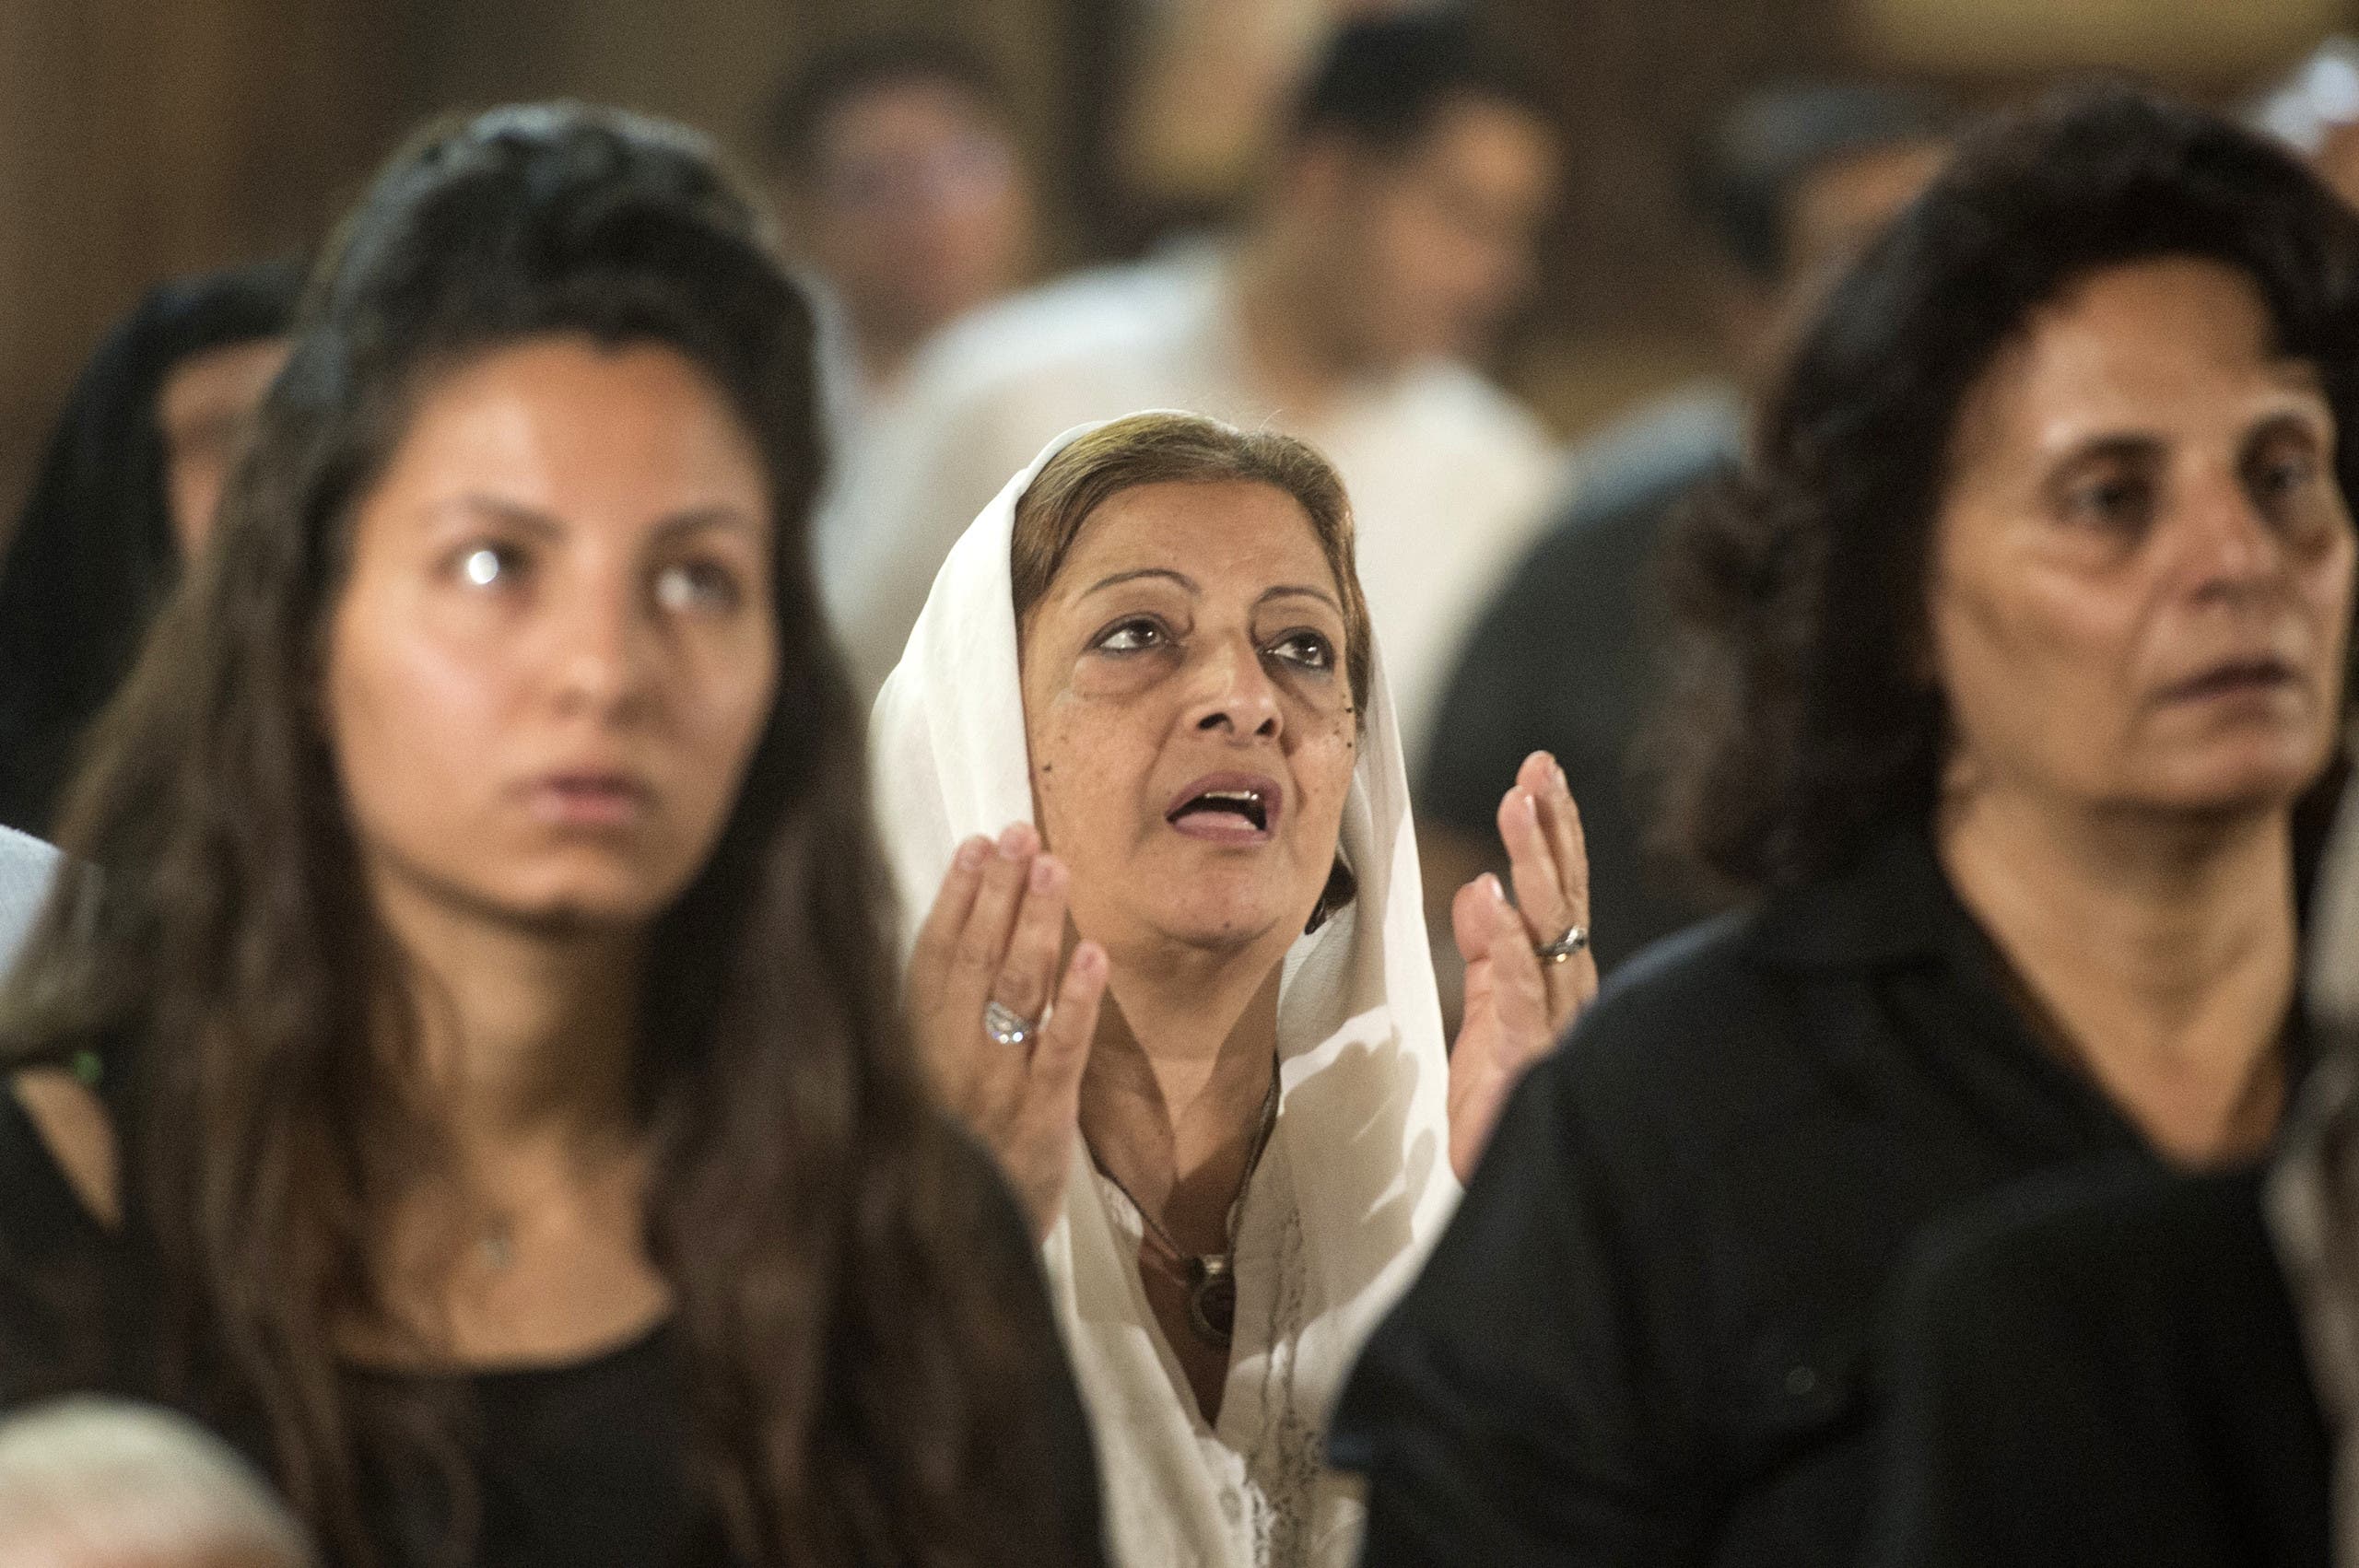 Relatives and friends of the cabin crew and passengers, who were on board the EgyptAir plane that crashed in the Mediterranean, attend a mourning ceremony on May 22, 2016 at a Church in Cairo. (AFP)